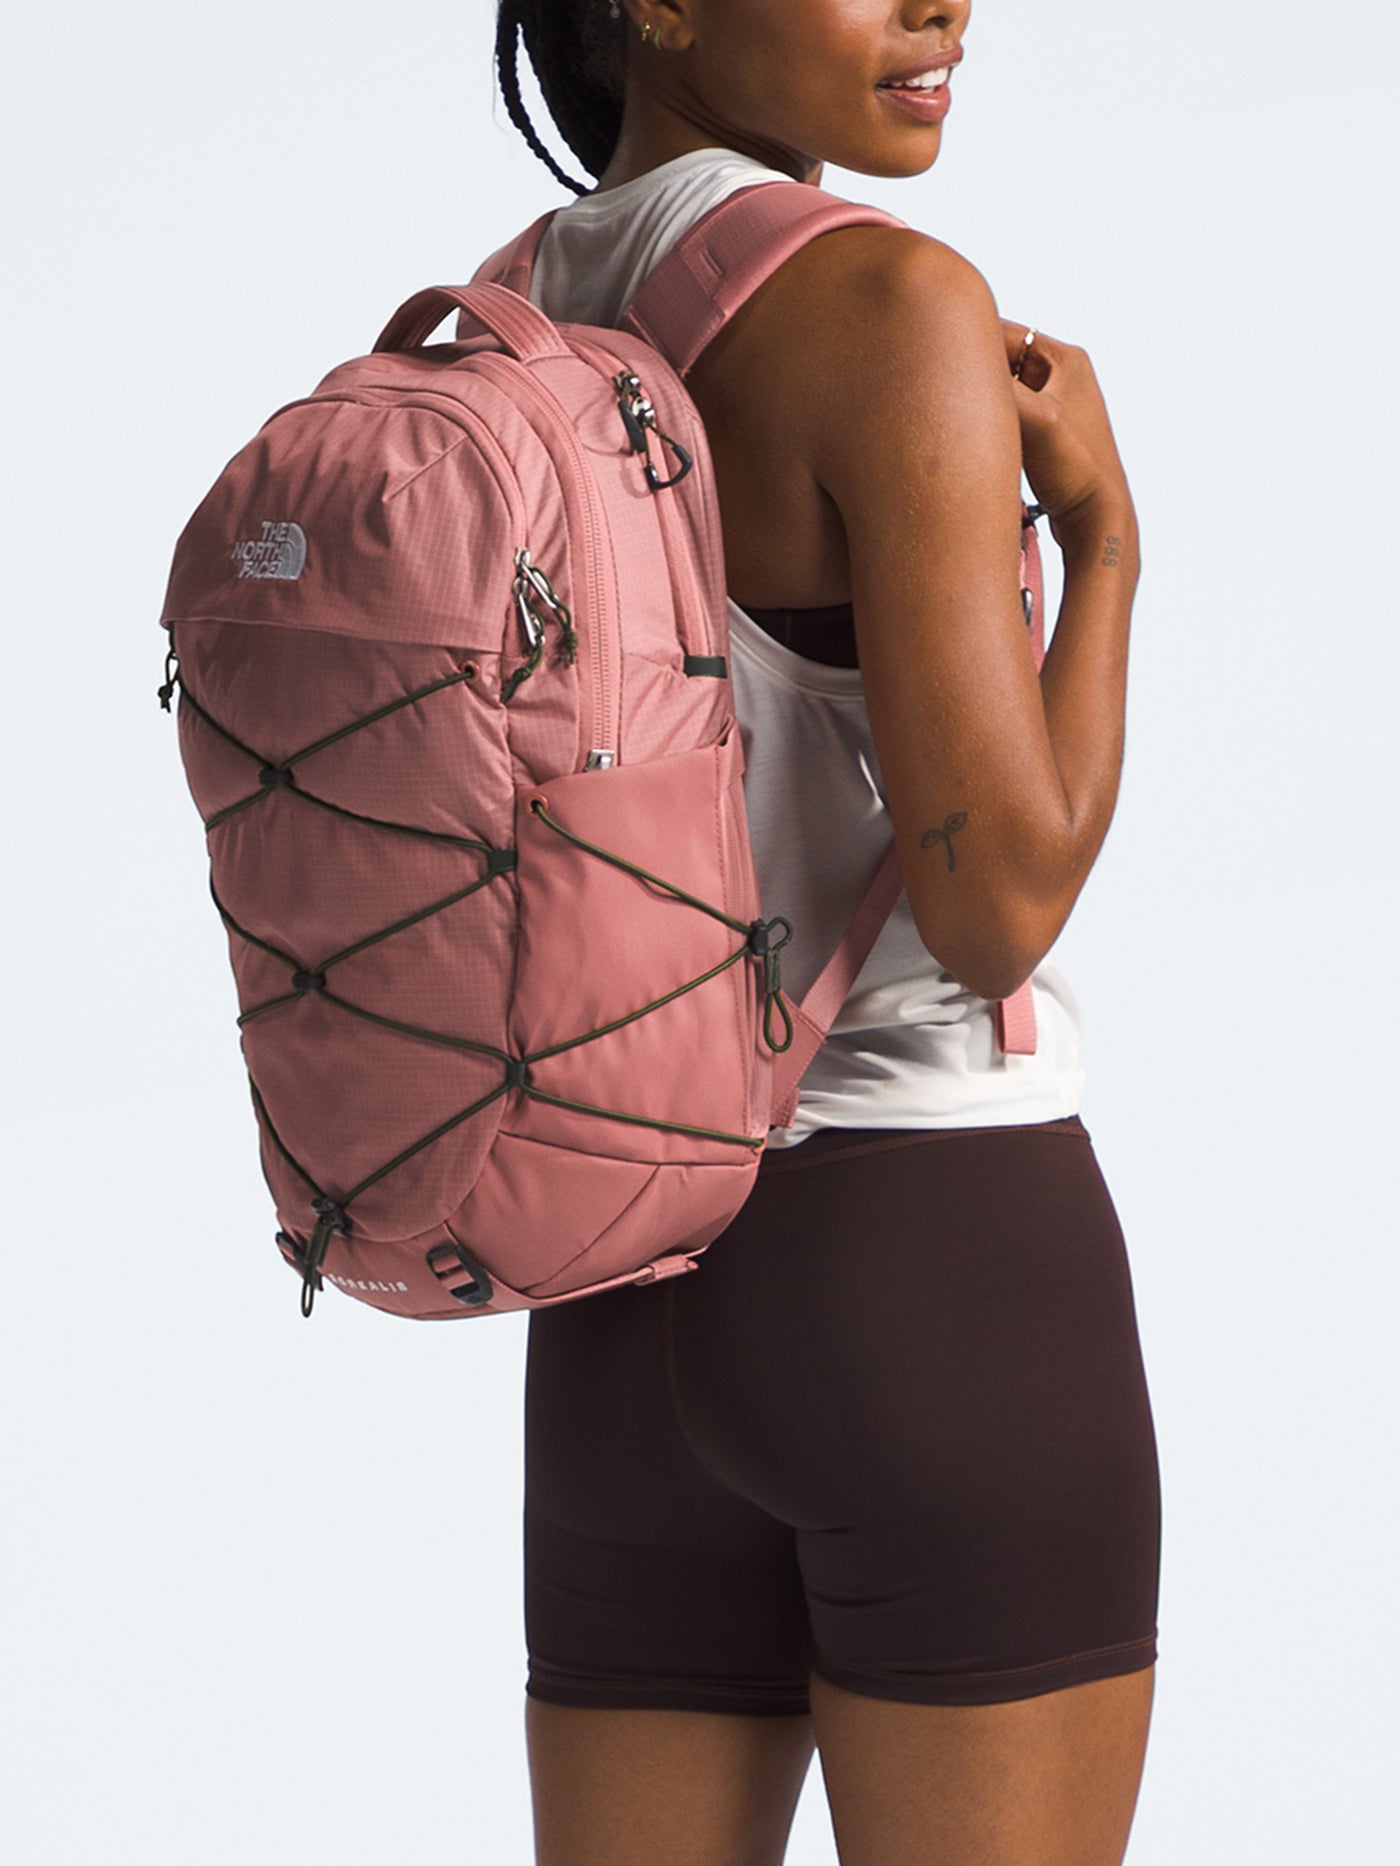 The North Face Borealis Women Backpack